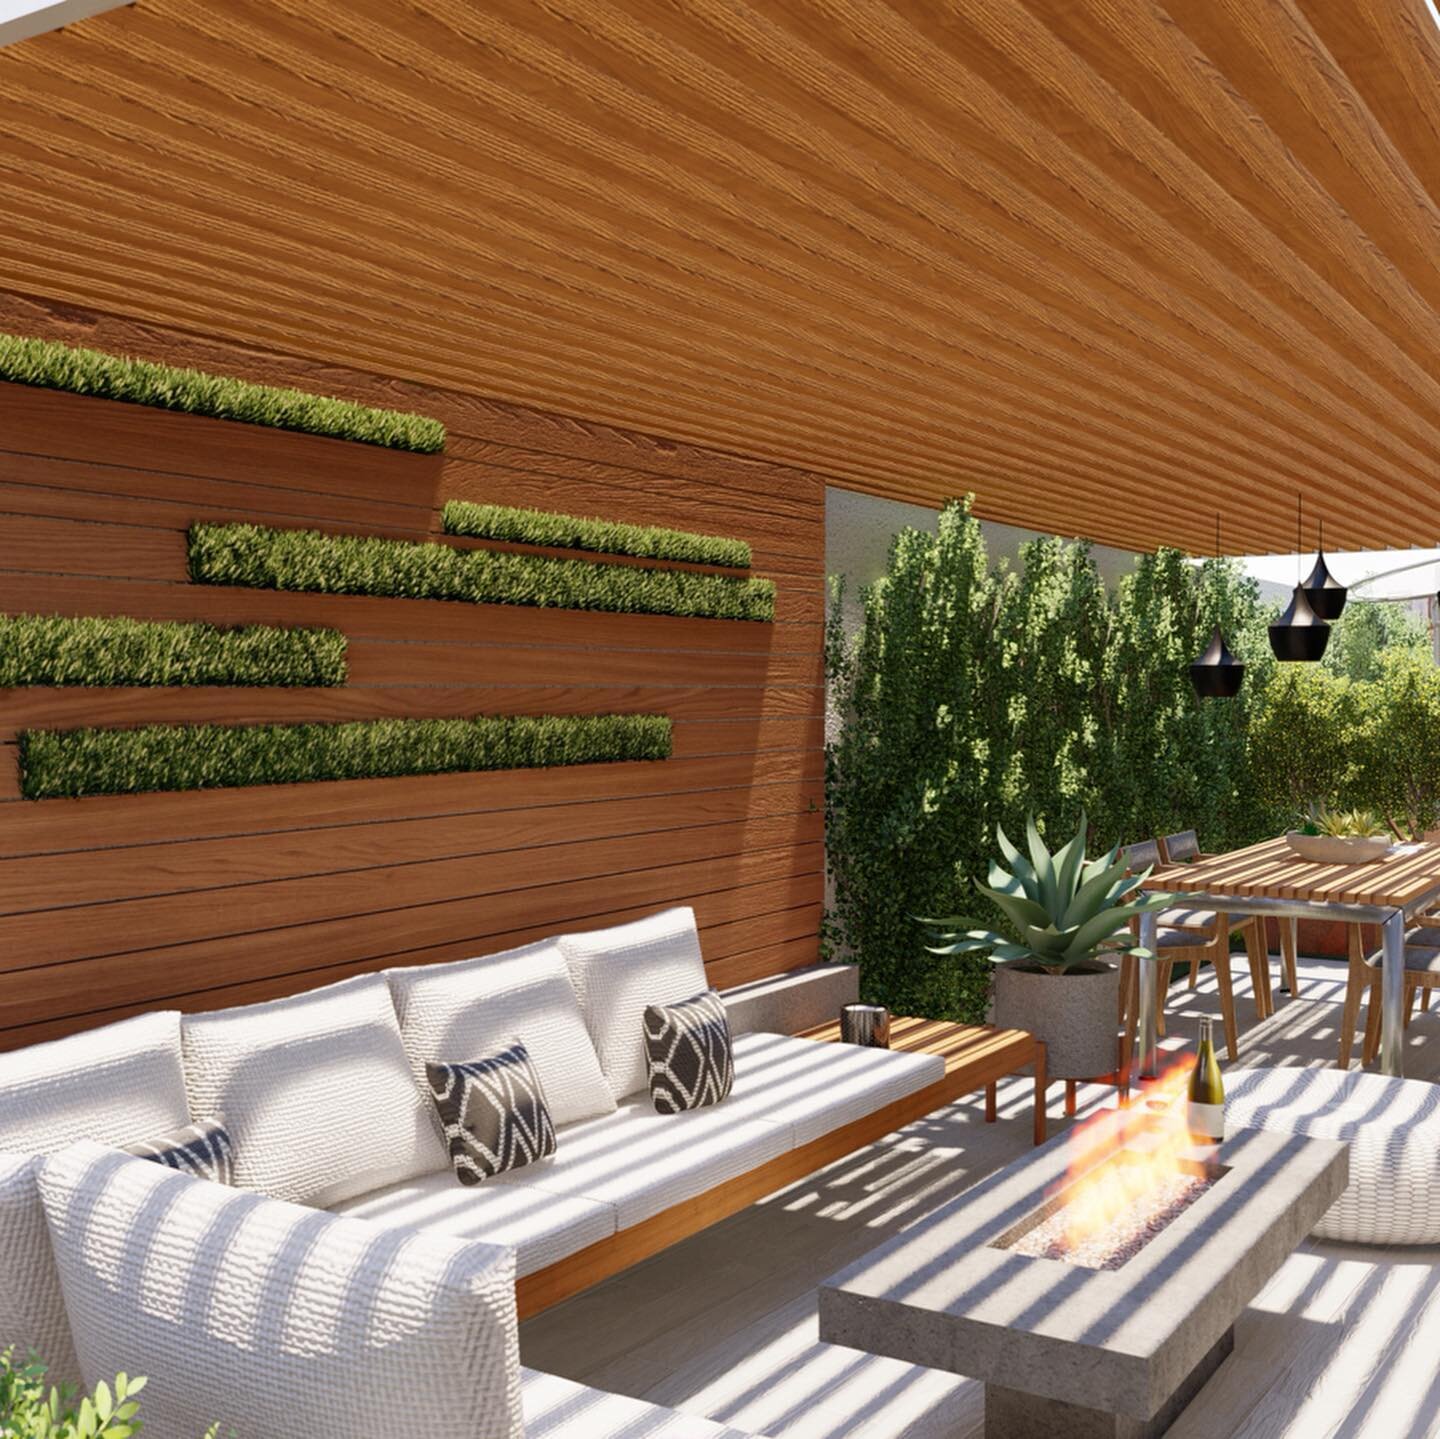 Making the most of a small space, this design aims to maximize the outdoor living space of a garden that measures only 9&rsquo; wide. 
#ThinkOutsideDesign #landscapedesign #landscapearchitecture #backyarddesign #shadestructure